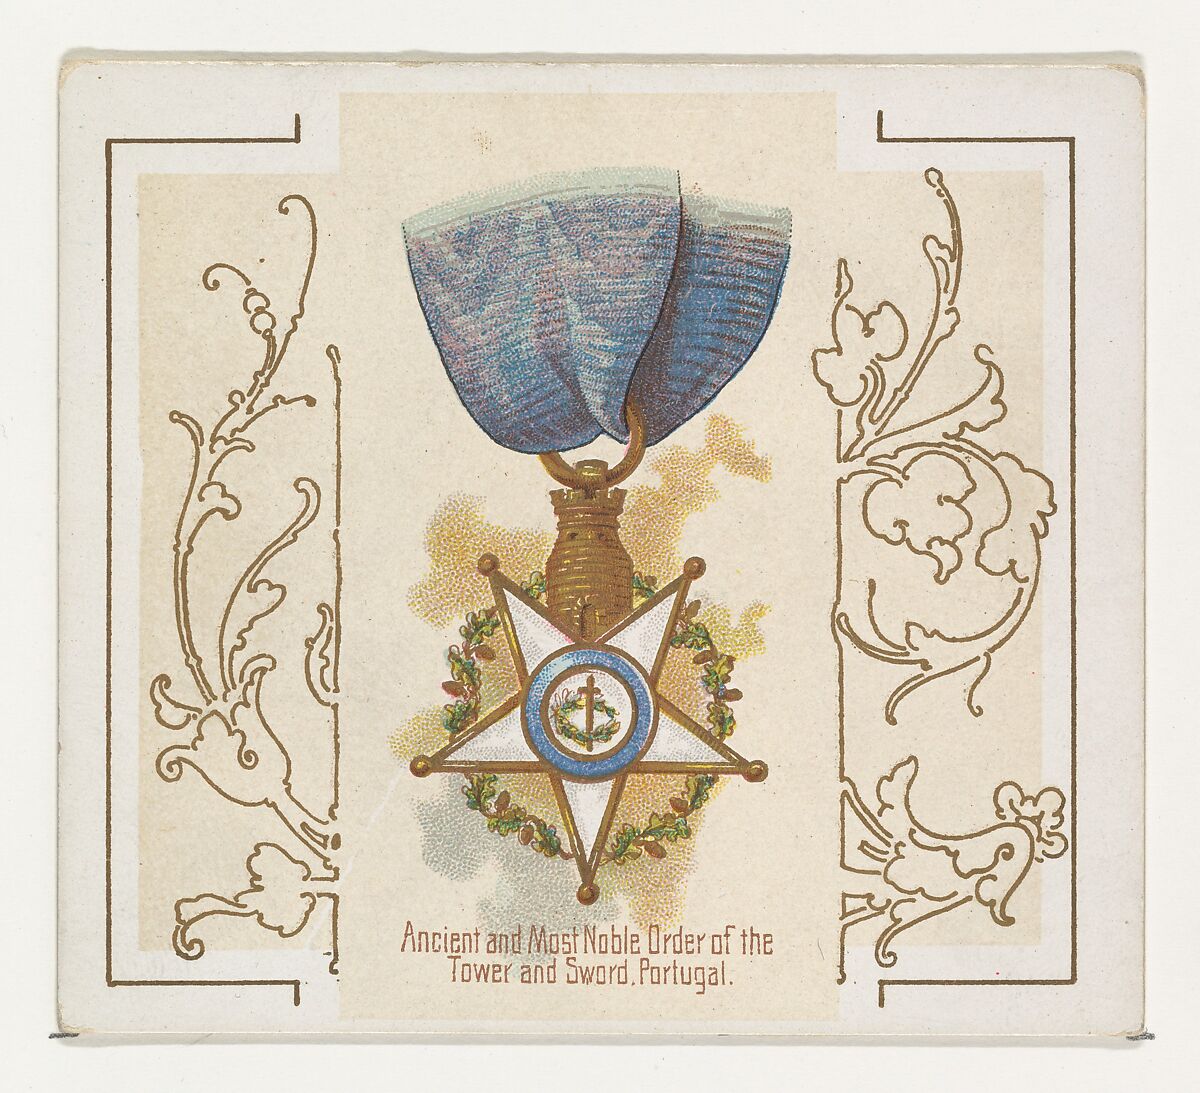 Ancient and Most Noble Order of the Tower and Sword, Portugal, from the World's Decorations series (N44) for Allen & Ginter Cigarettes, Issued by Allen &amp; Ginter (American, Richmond, Virginia), Commercial color lithograph 